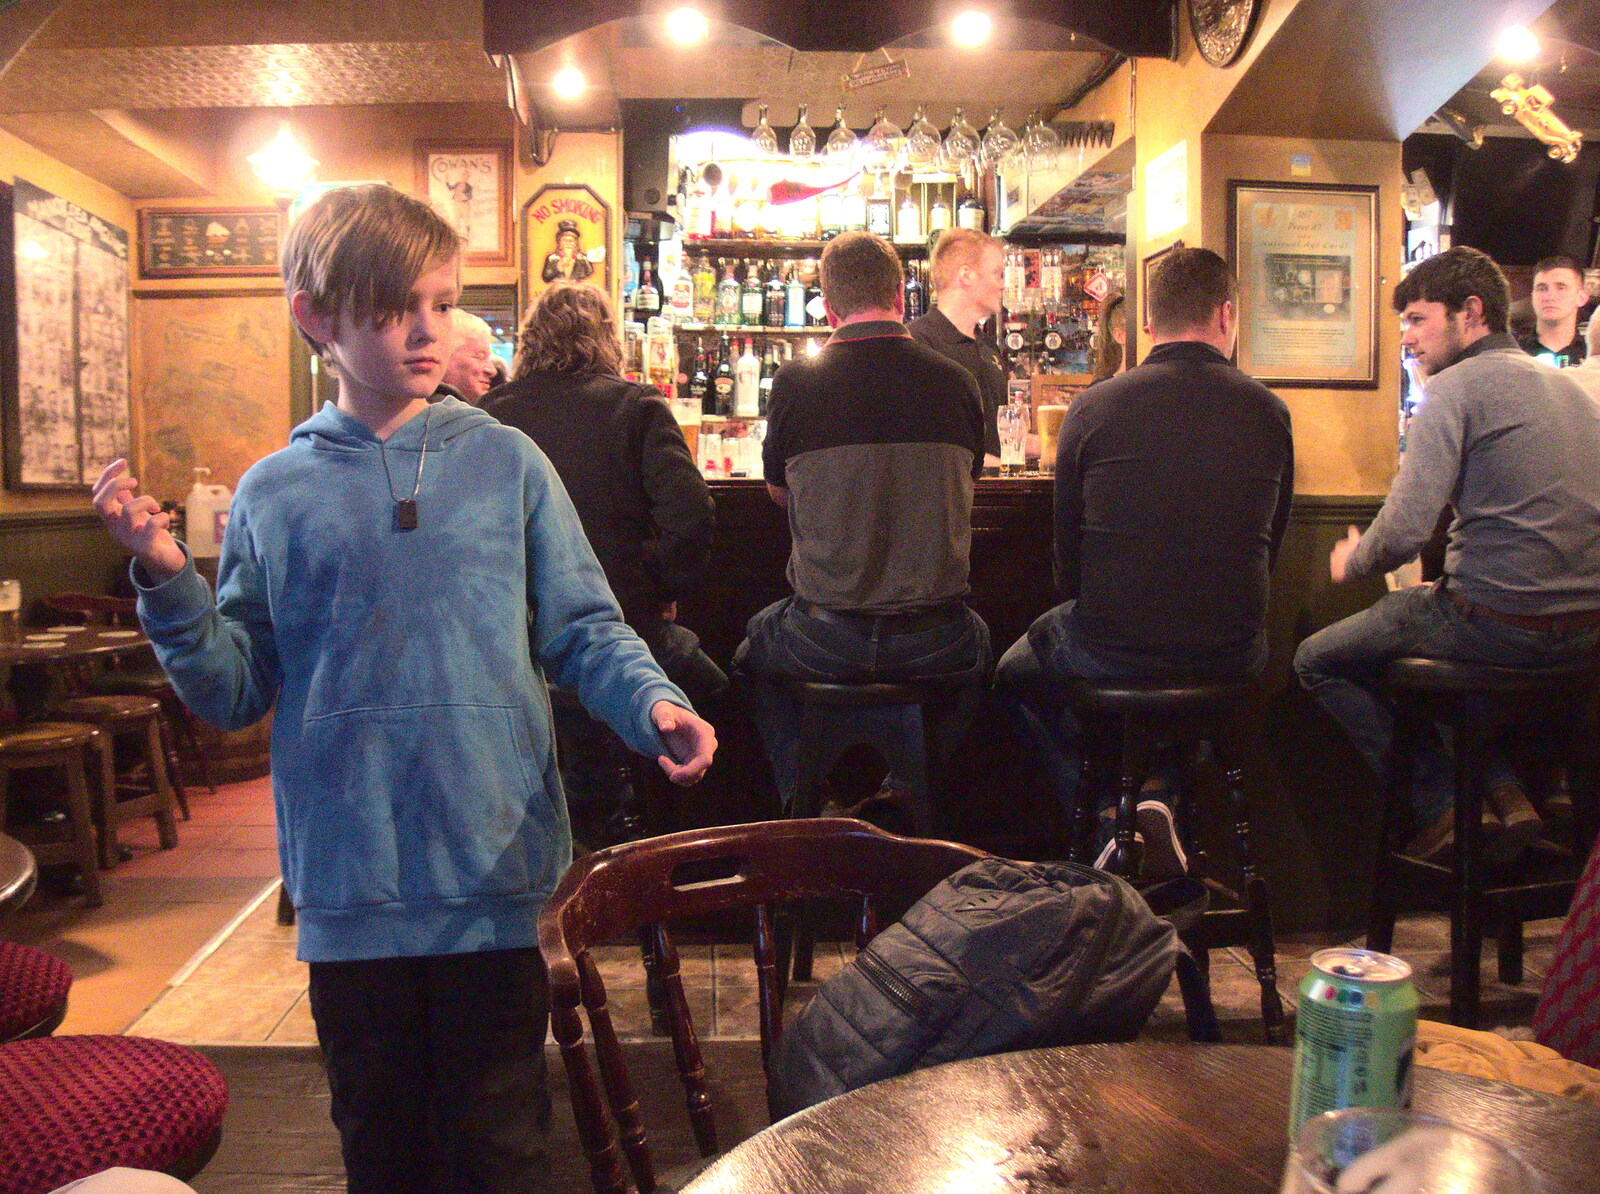 Harry roams around in the bar from Manorhamilton and Bundoran, Leitrim and Donegal, Ireland - 16th April 2022